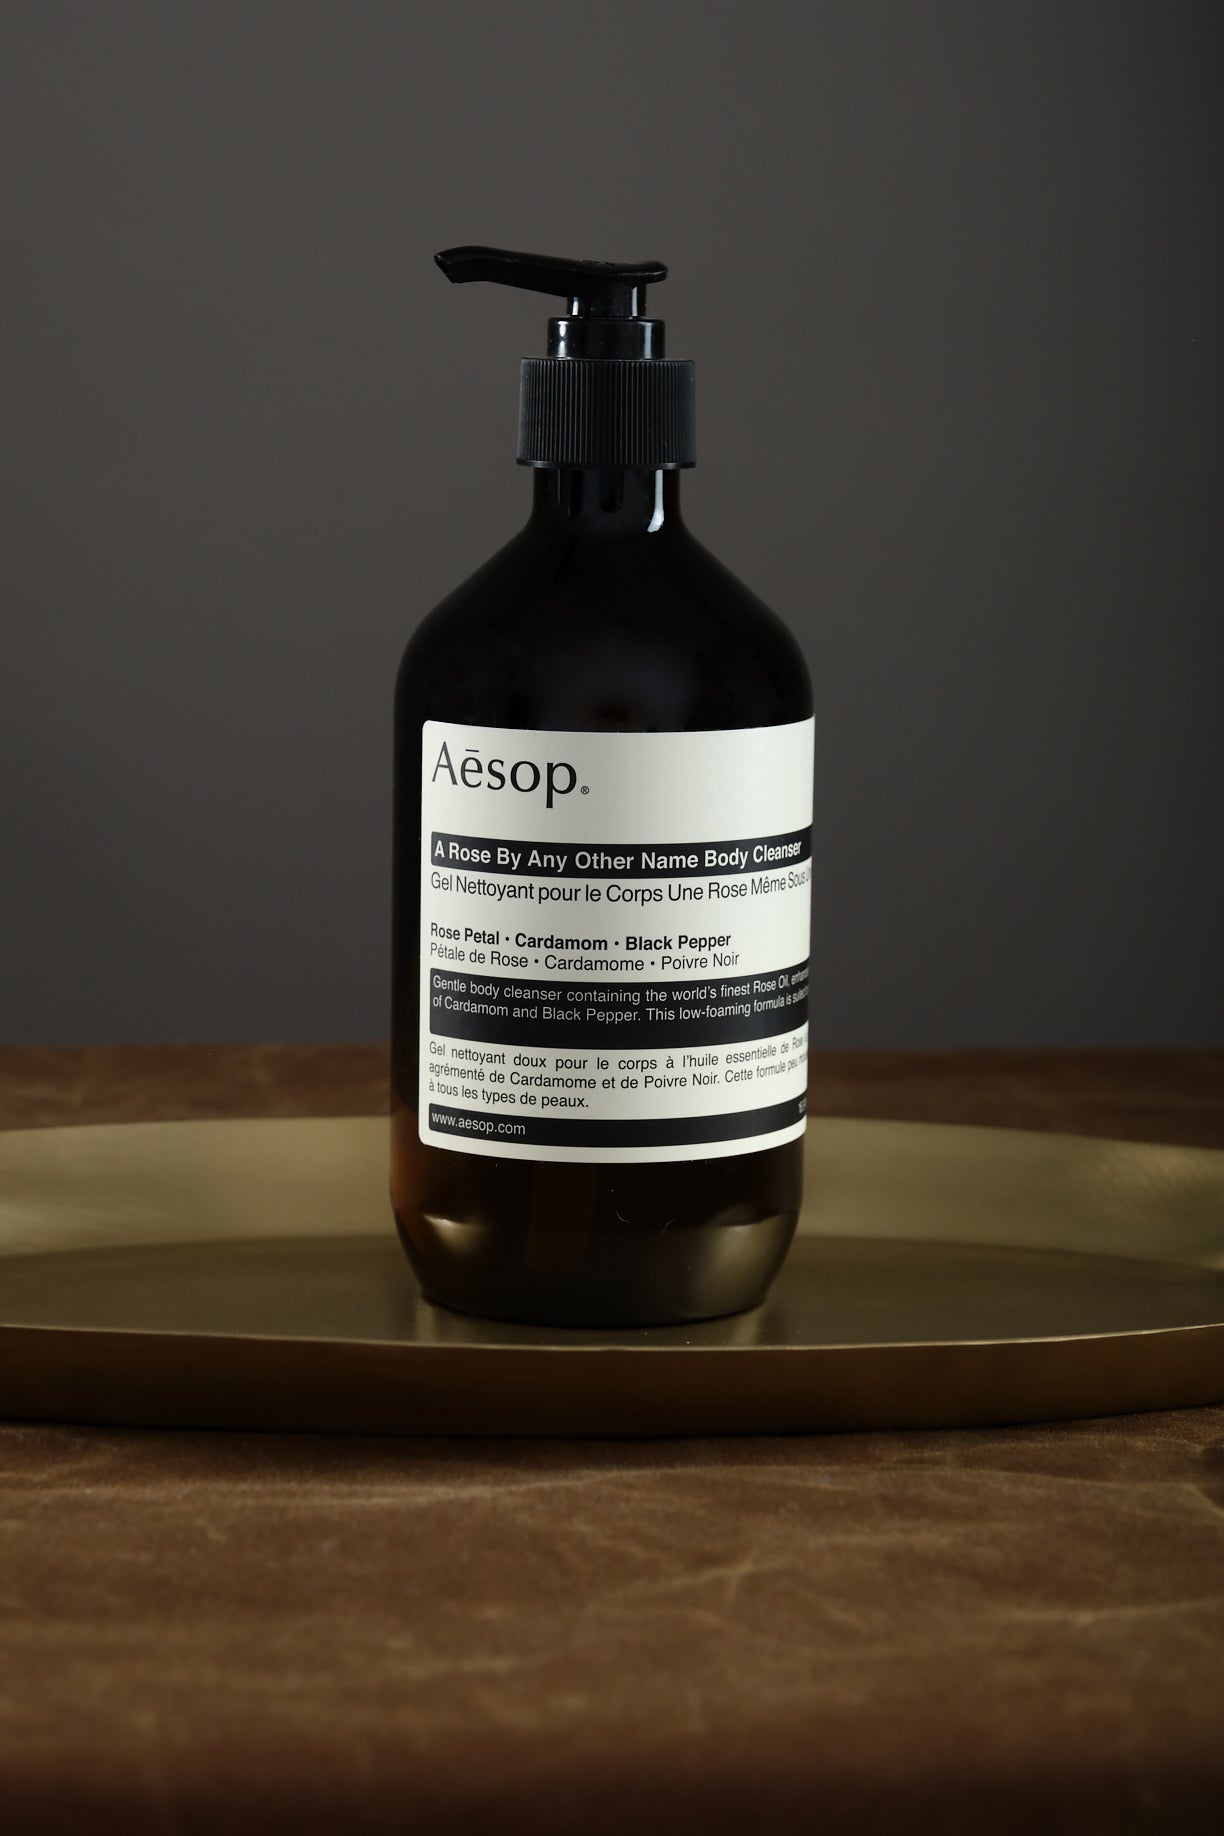 a rose by any other name body cleanser Aesop